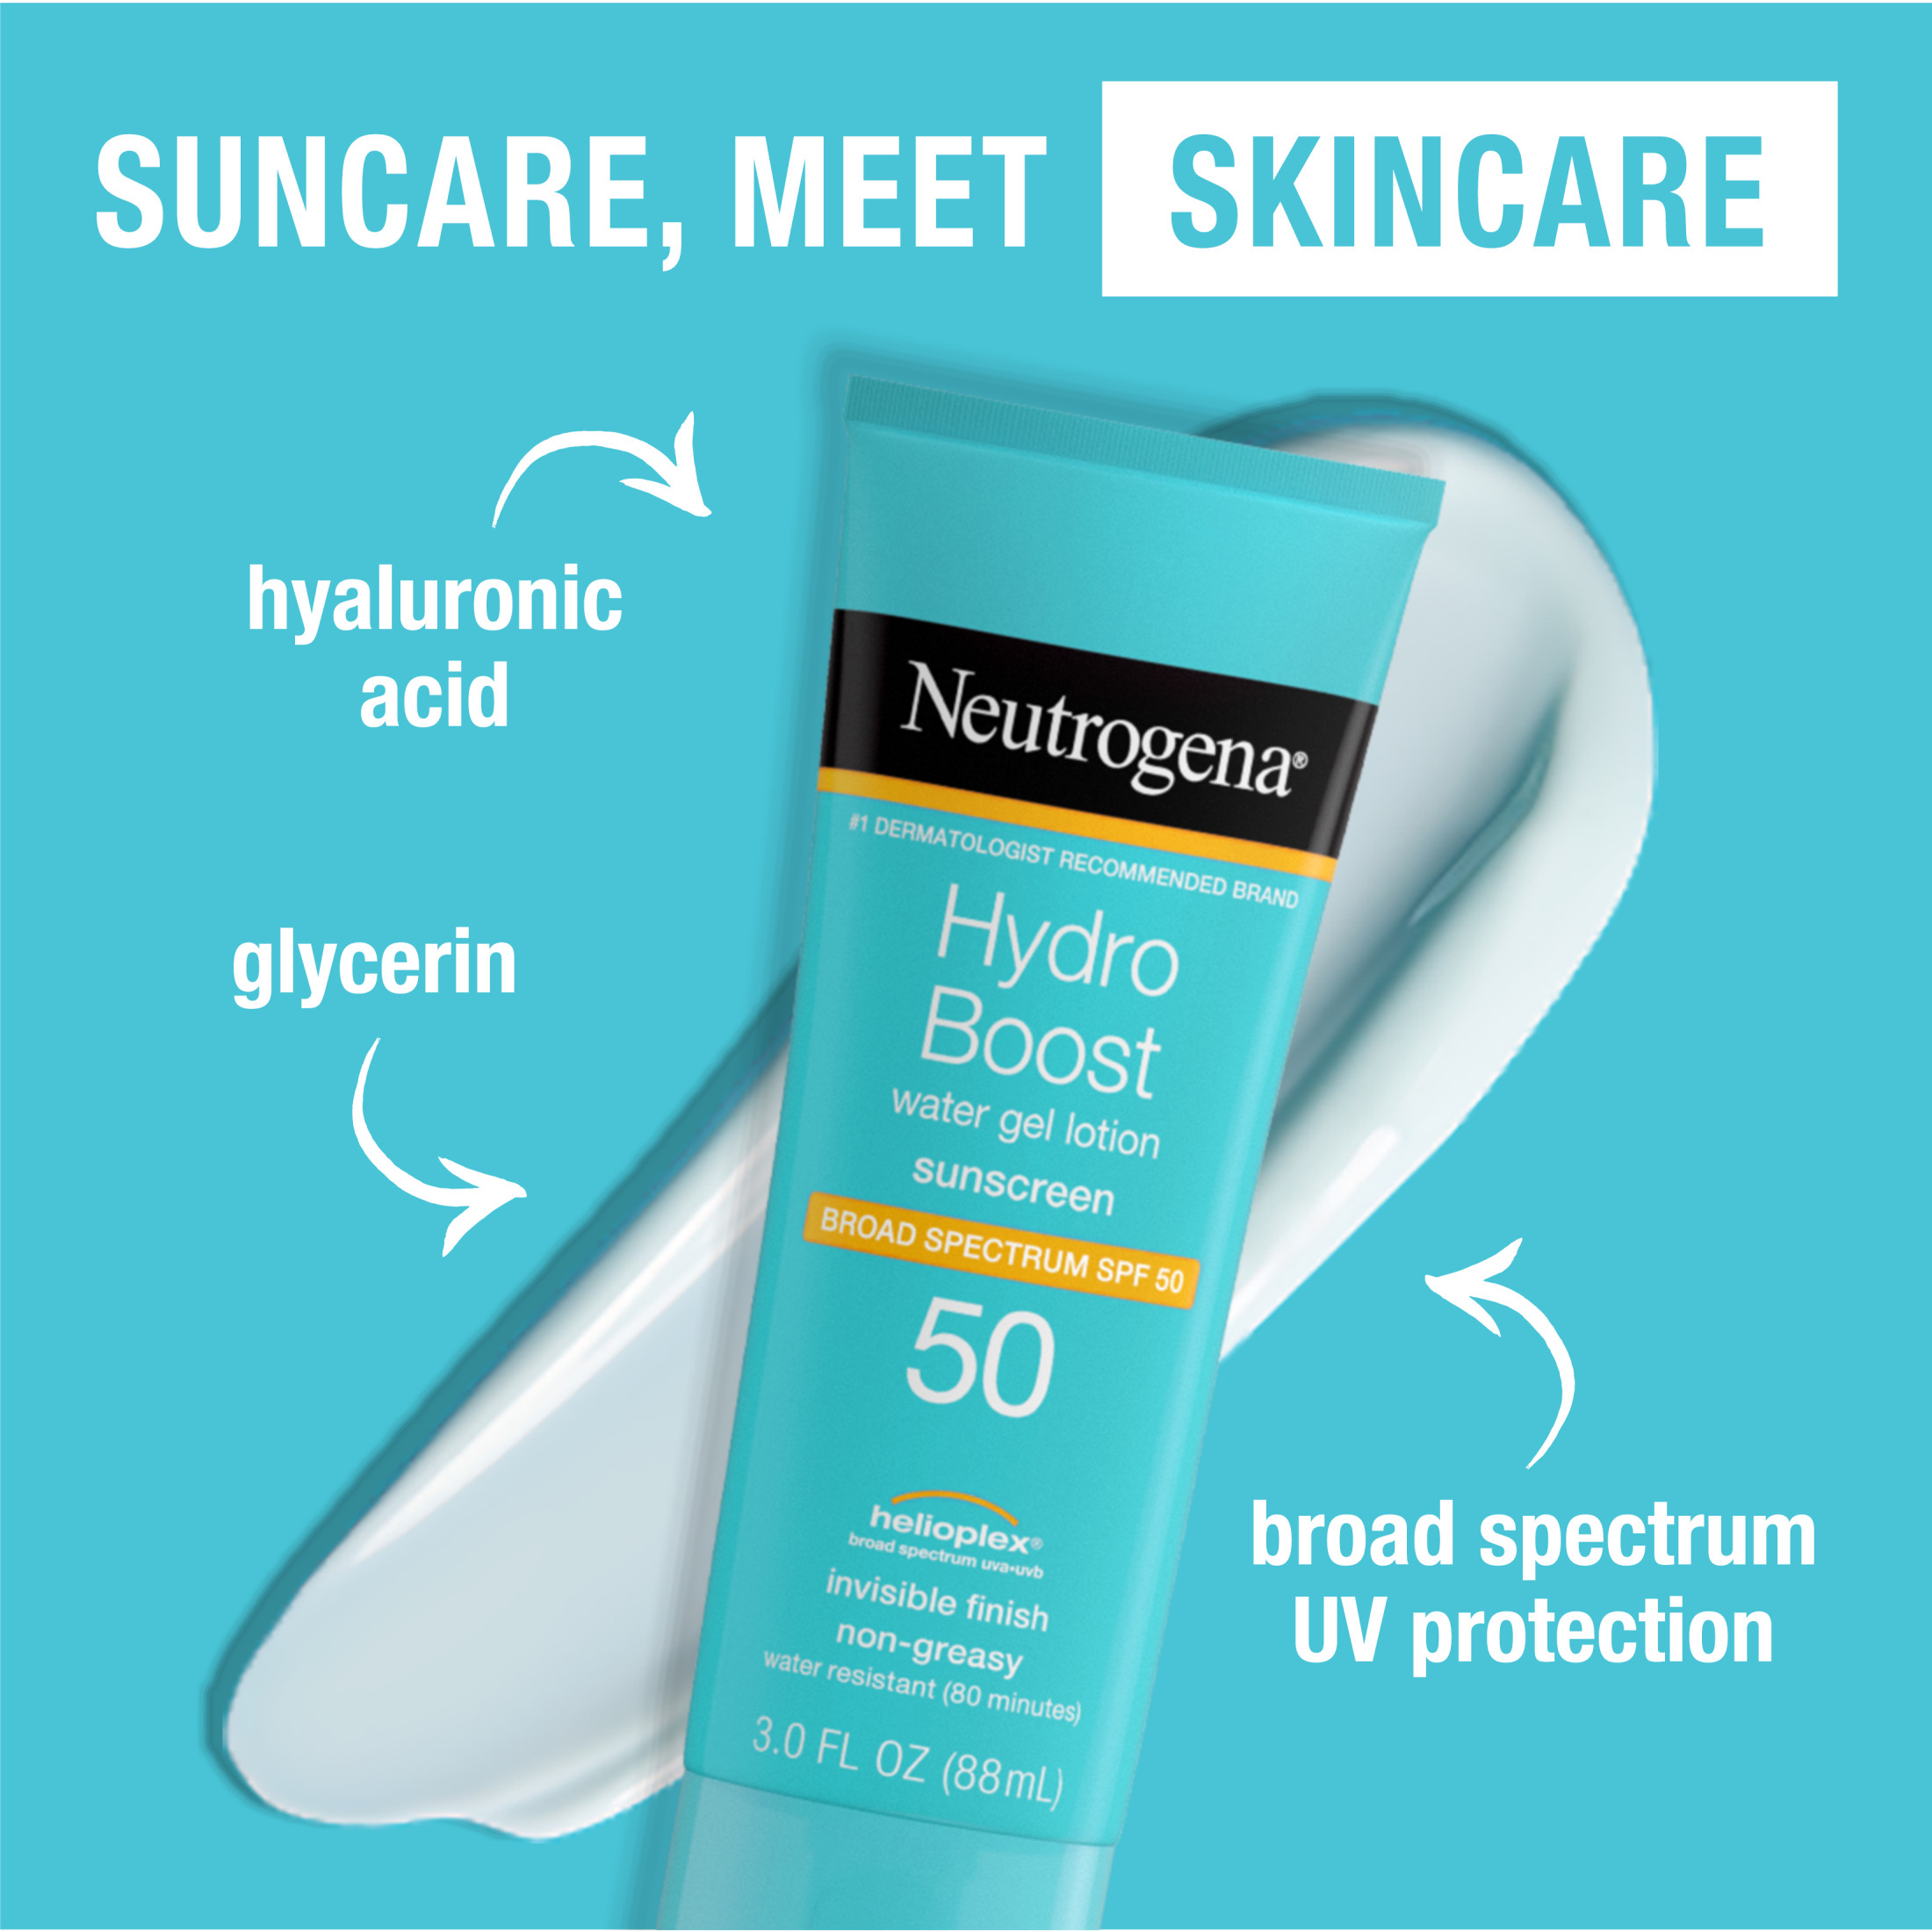 Neutrogena Hydro Boost Moisturizing Gel Sunscreen Lotion for Face and Body, SPF 50, 3 oz - image 3 of 7